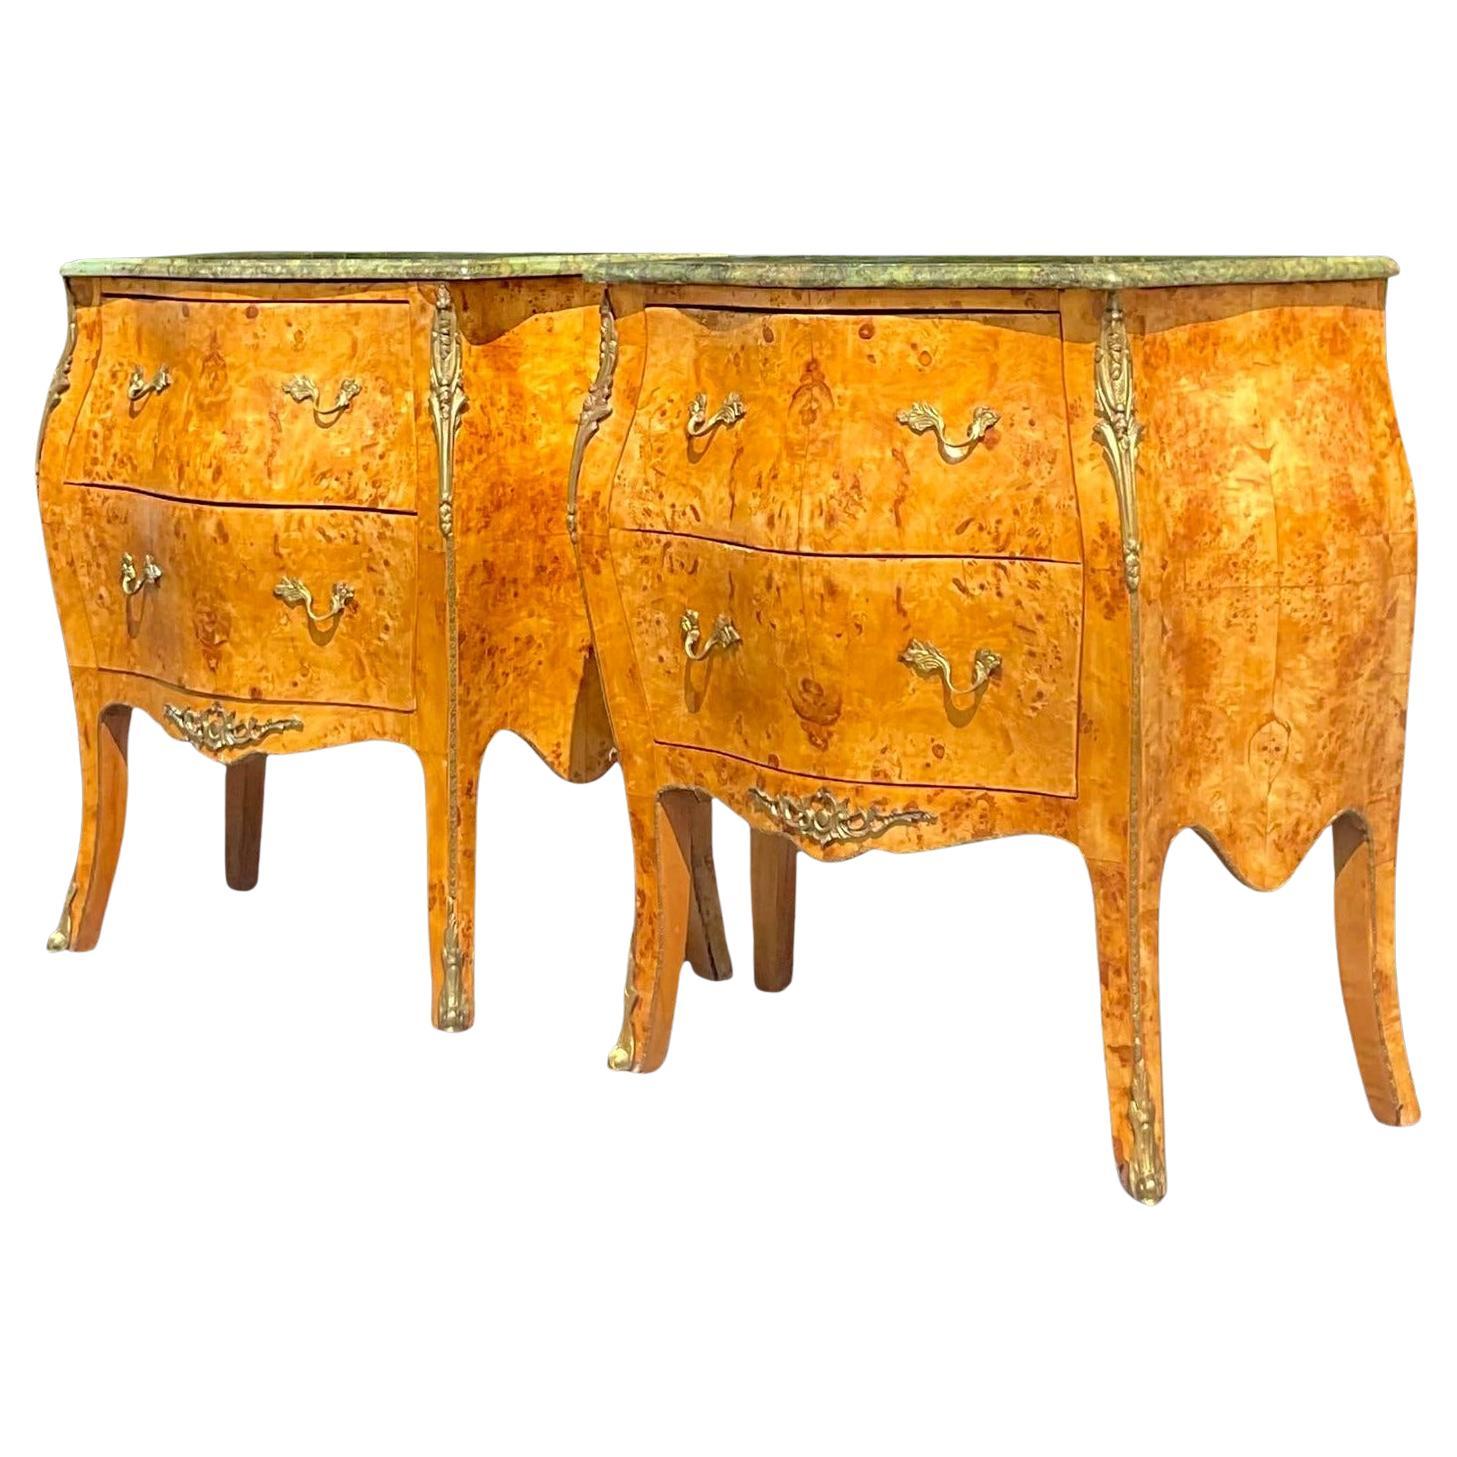 Late 20th Century Vintage Regency Burl Wood and Ormolu Bombe Chests - a Pair